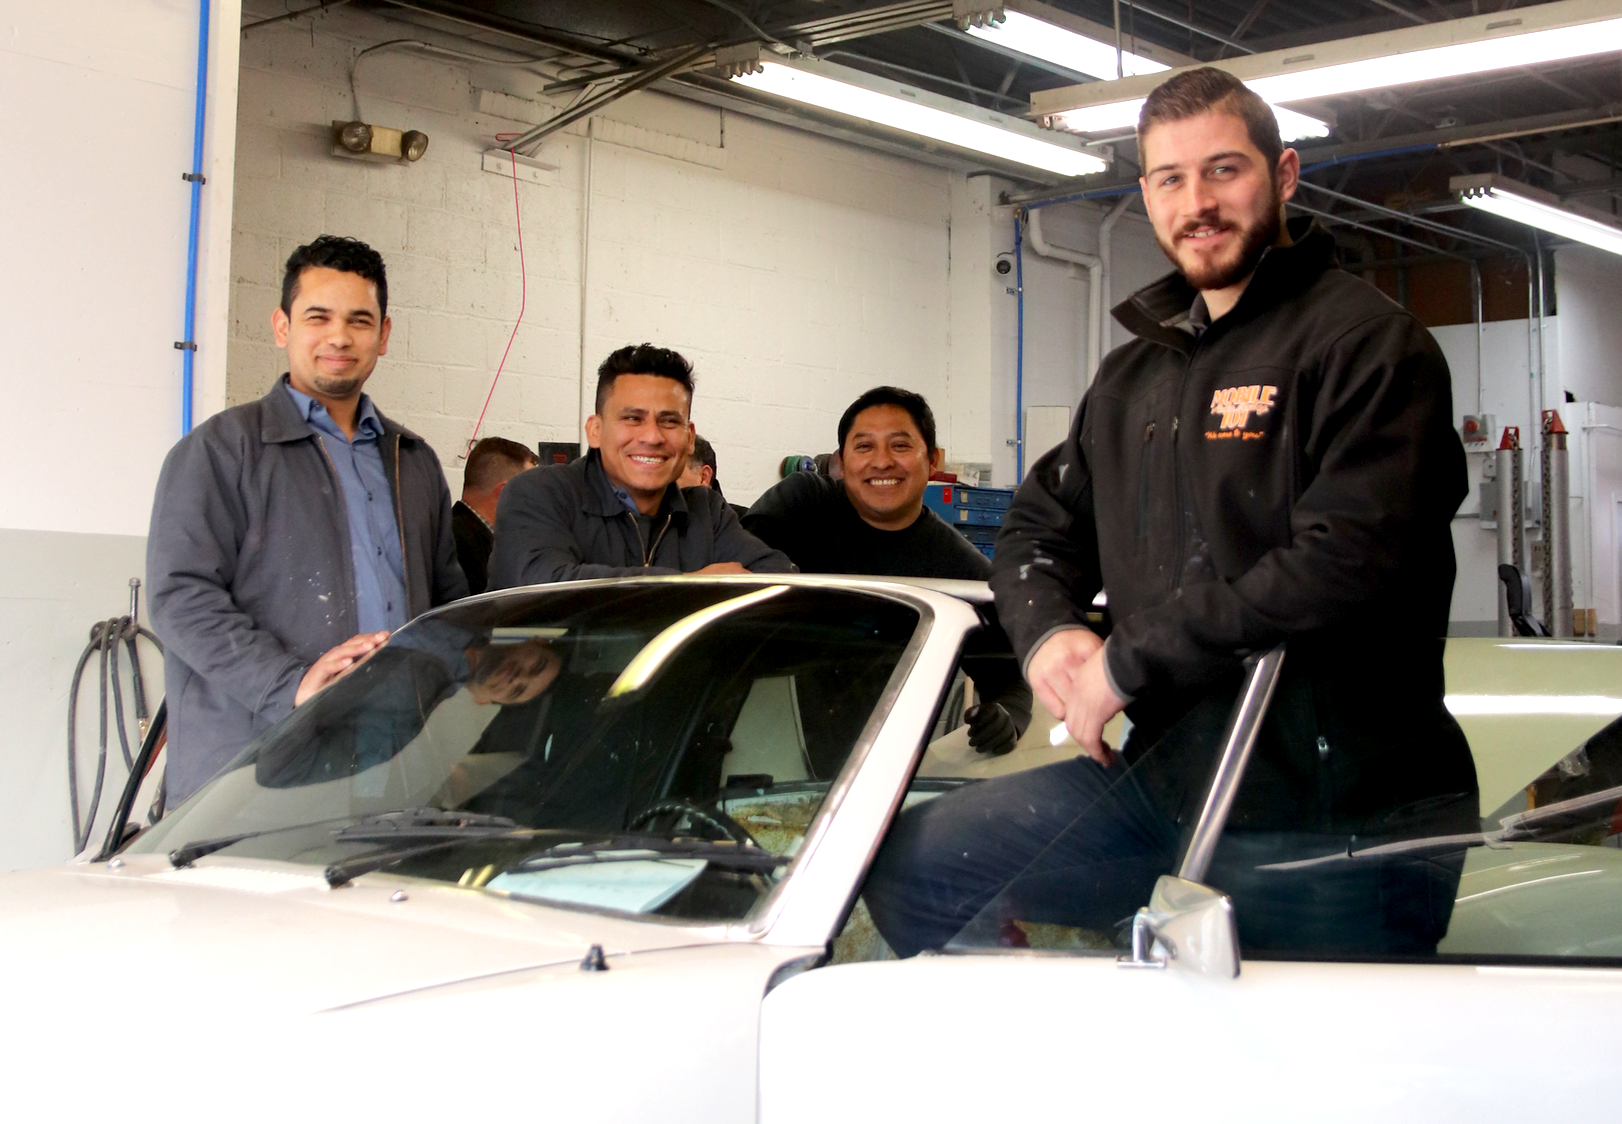 John Castellana Jr and some of his auto technicians at 368 West Ave in Stamford. Jan 21, 2020. Photo: Leslie Yager